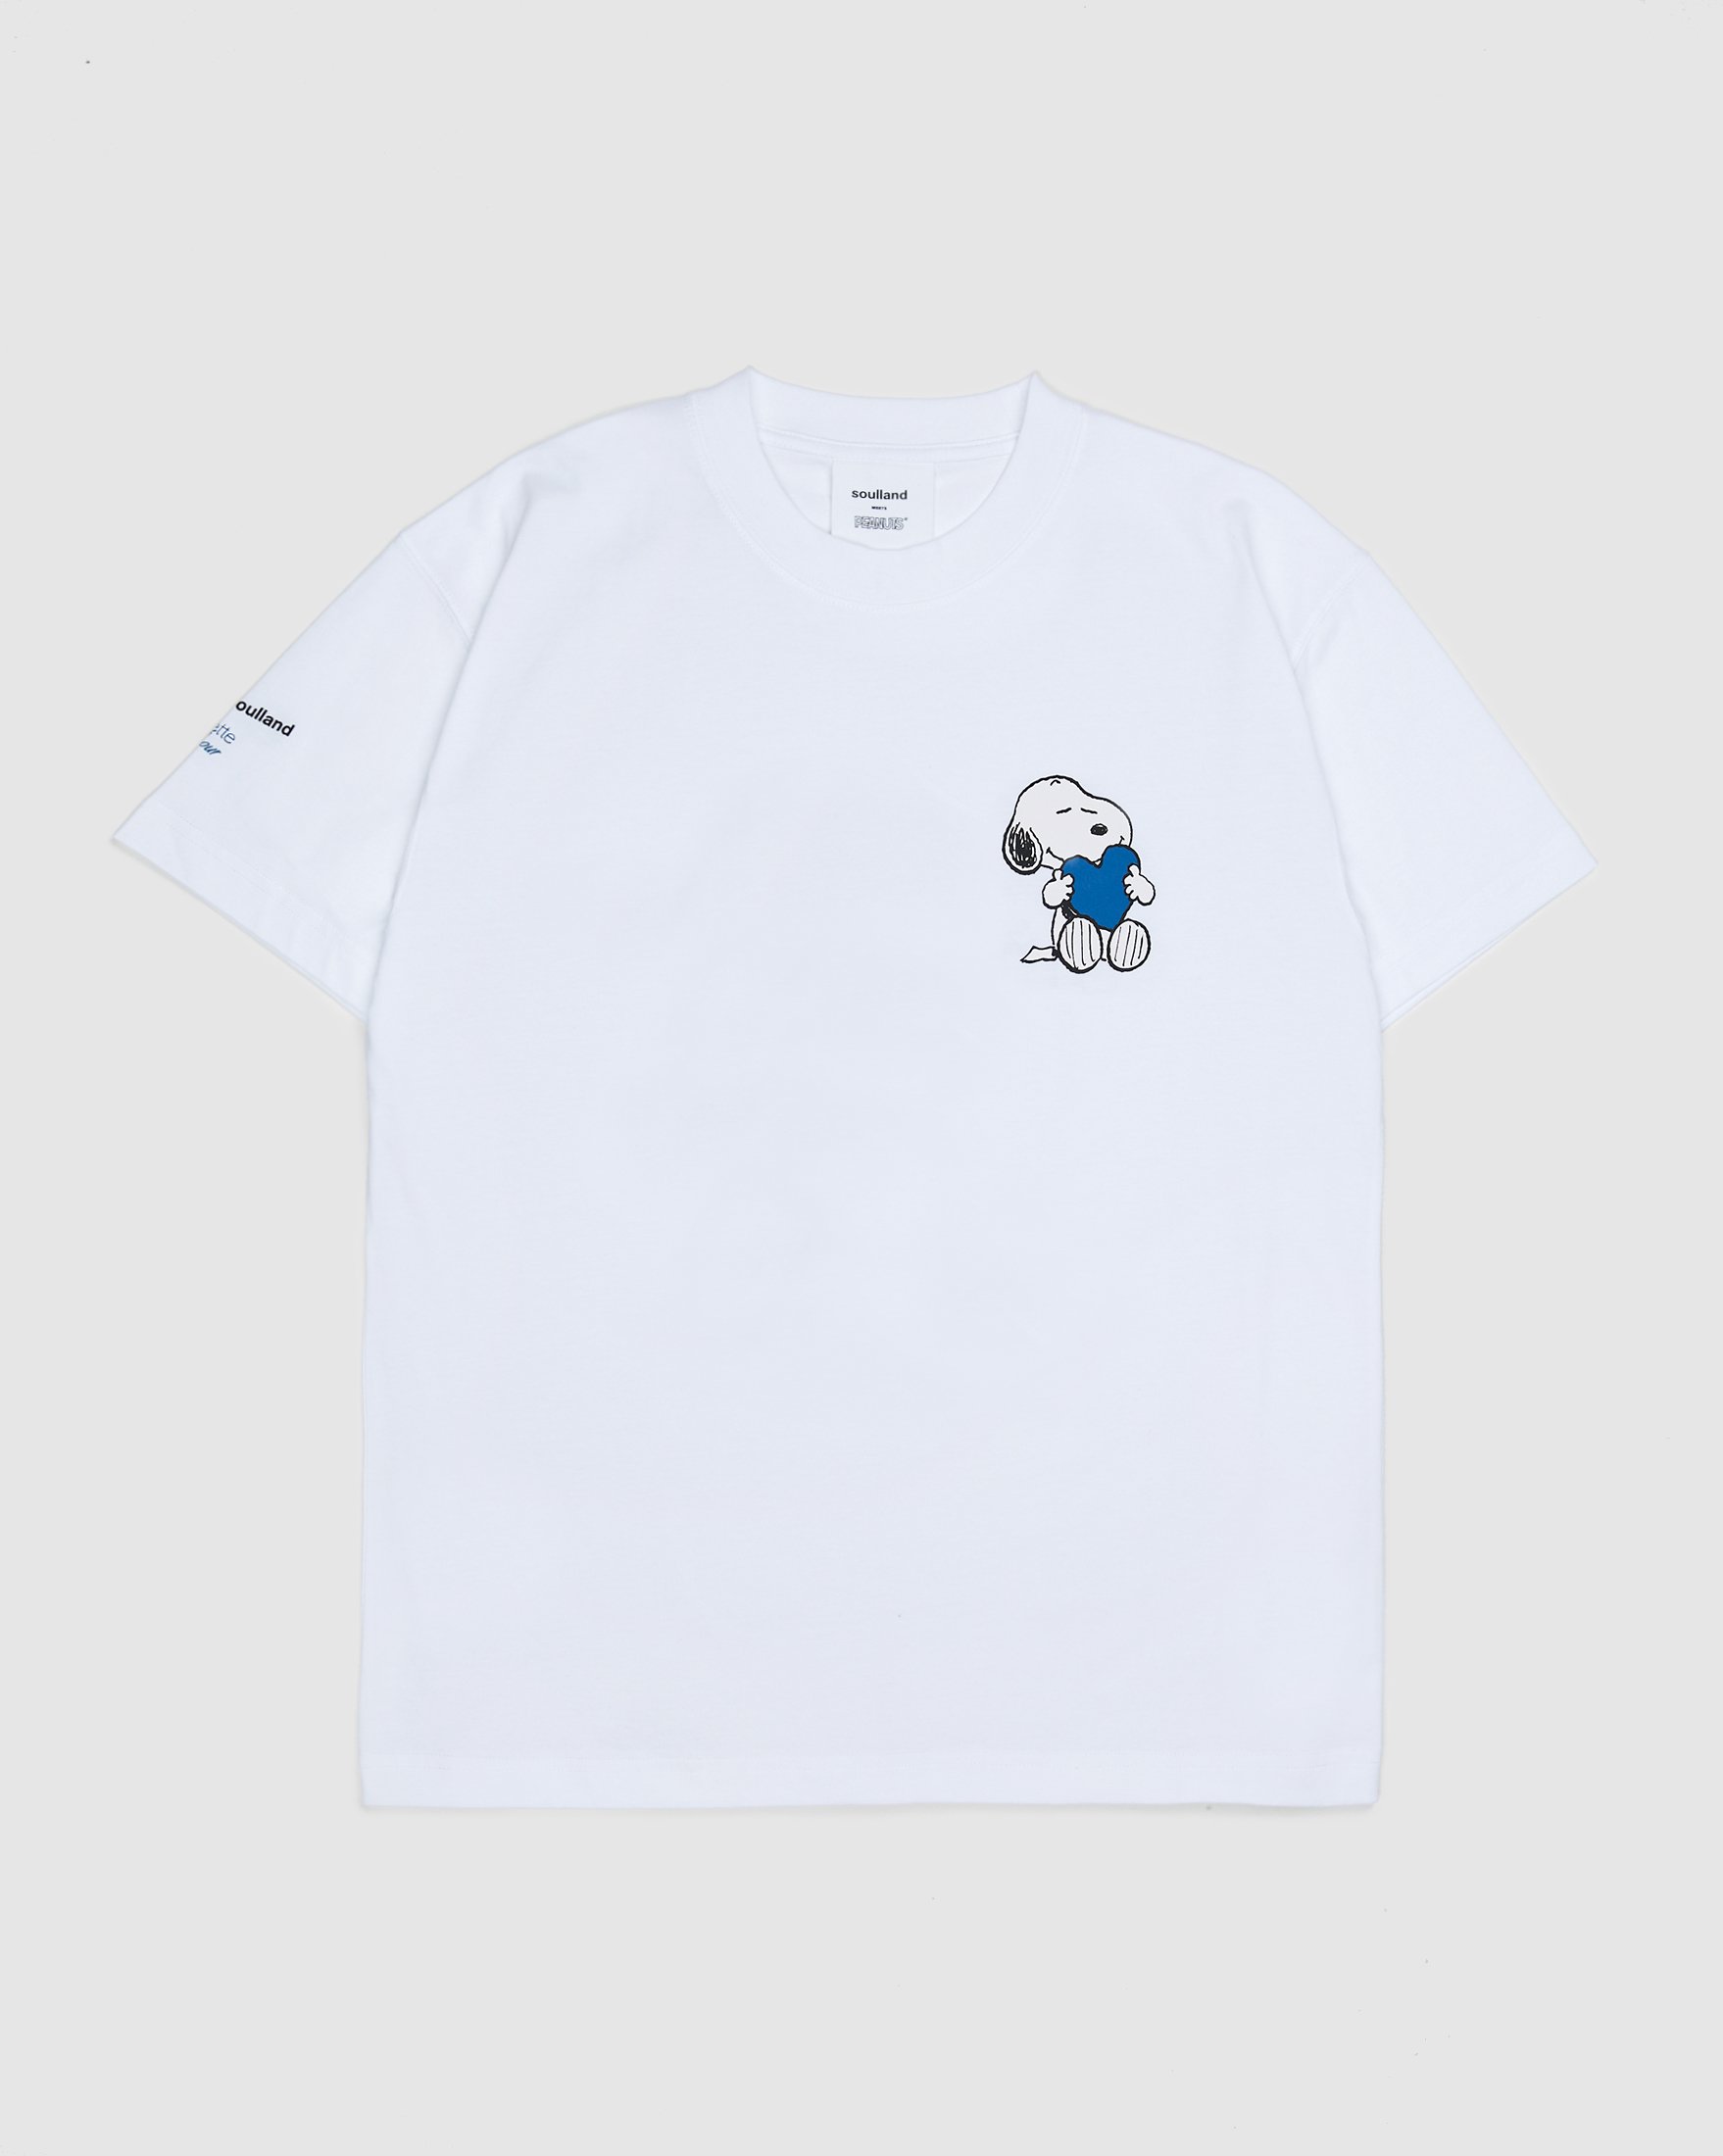 Colette Mon Amour x Soulland - Snoopy Comics White T-Shirt - Clothing - White - Image 1